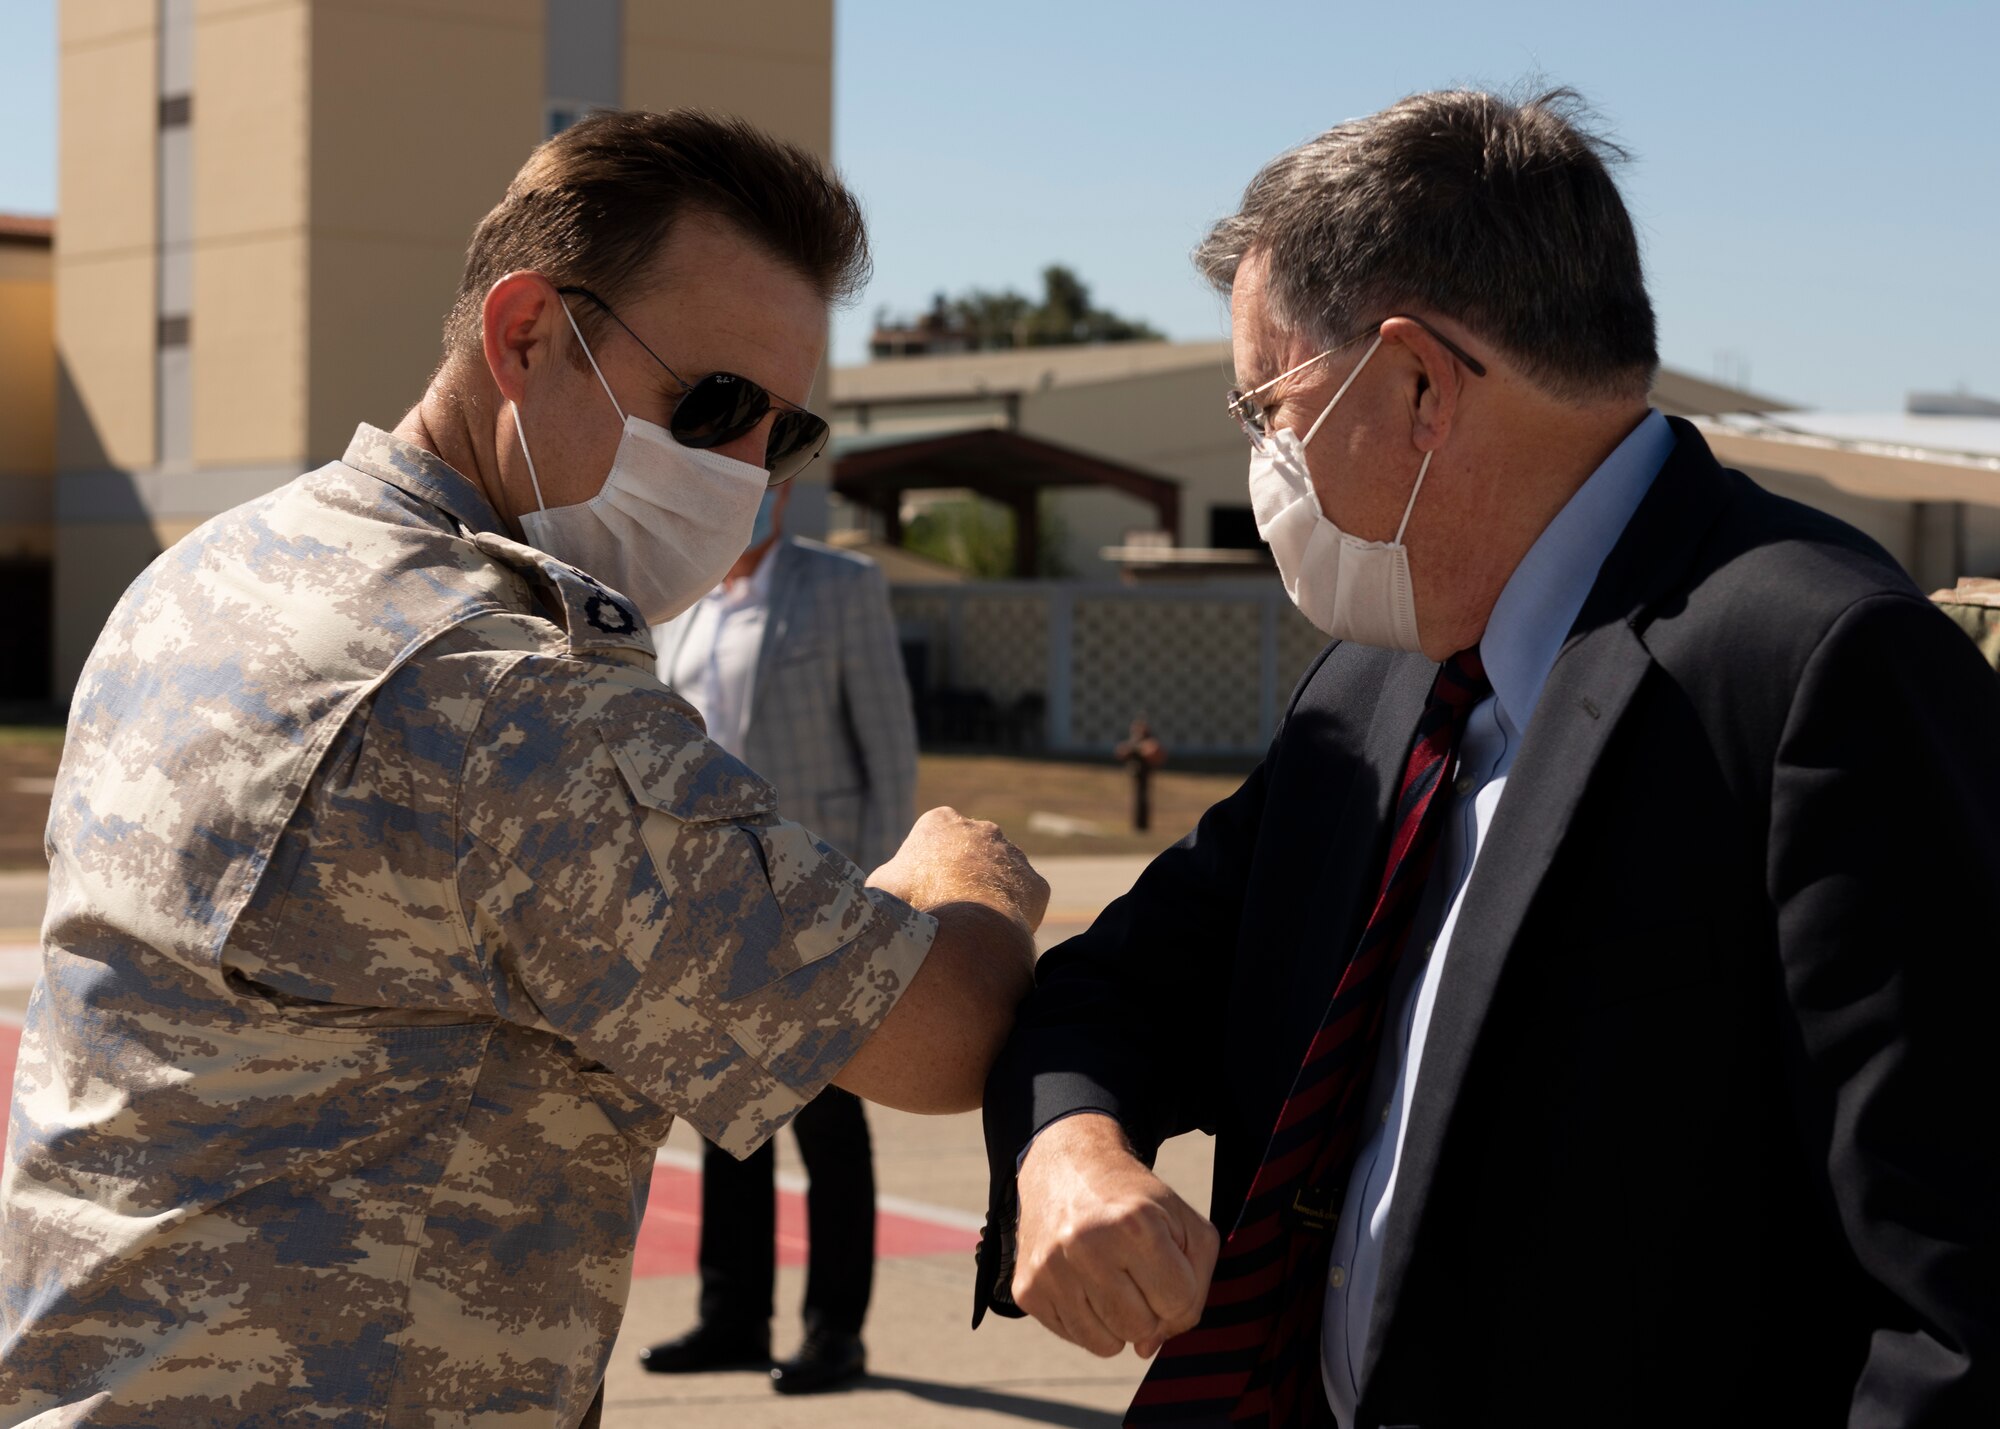 A Turkish Air Force colonel and the U.S. Ambassador to Turkey bump elbows in greeting while wearing face masks.